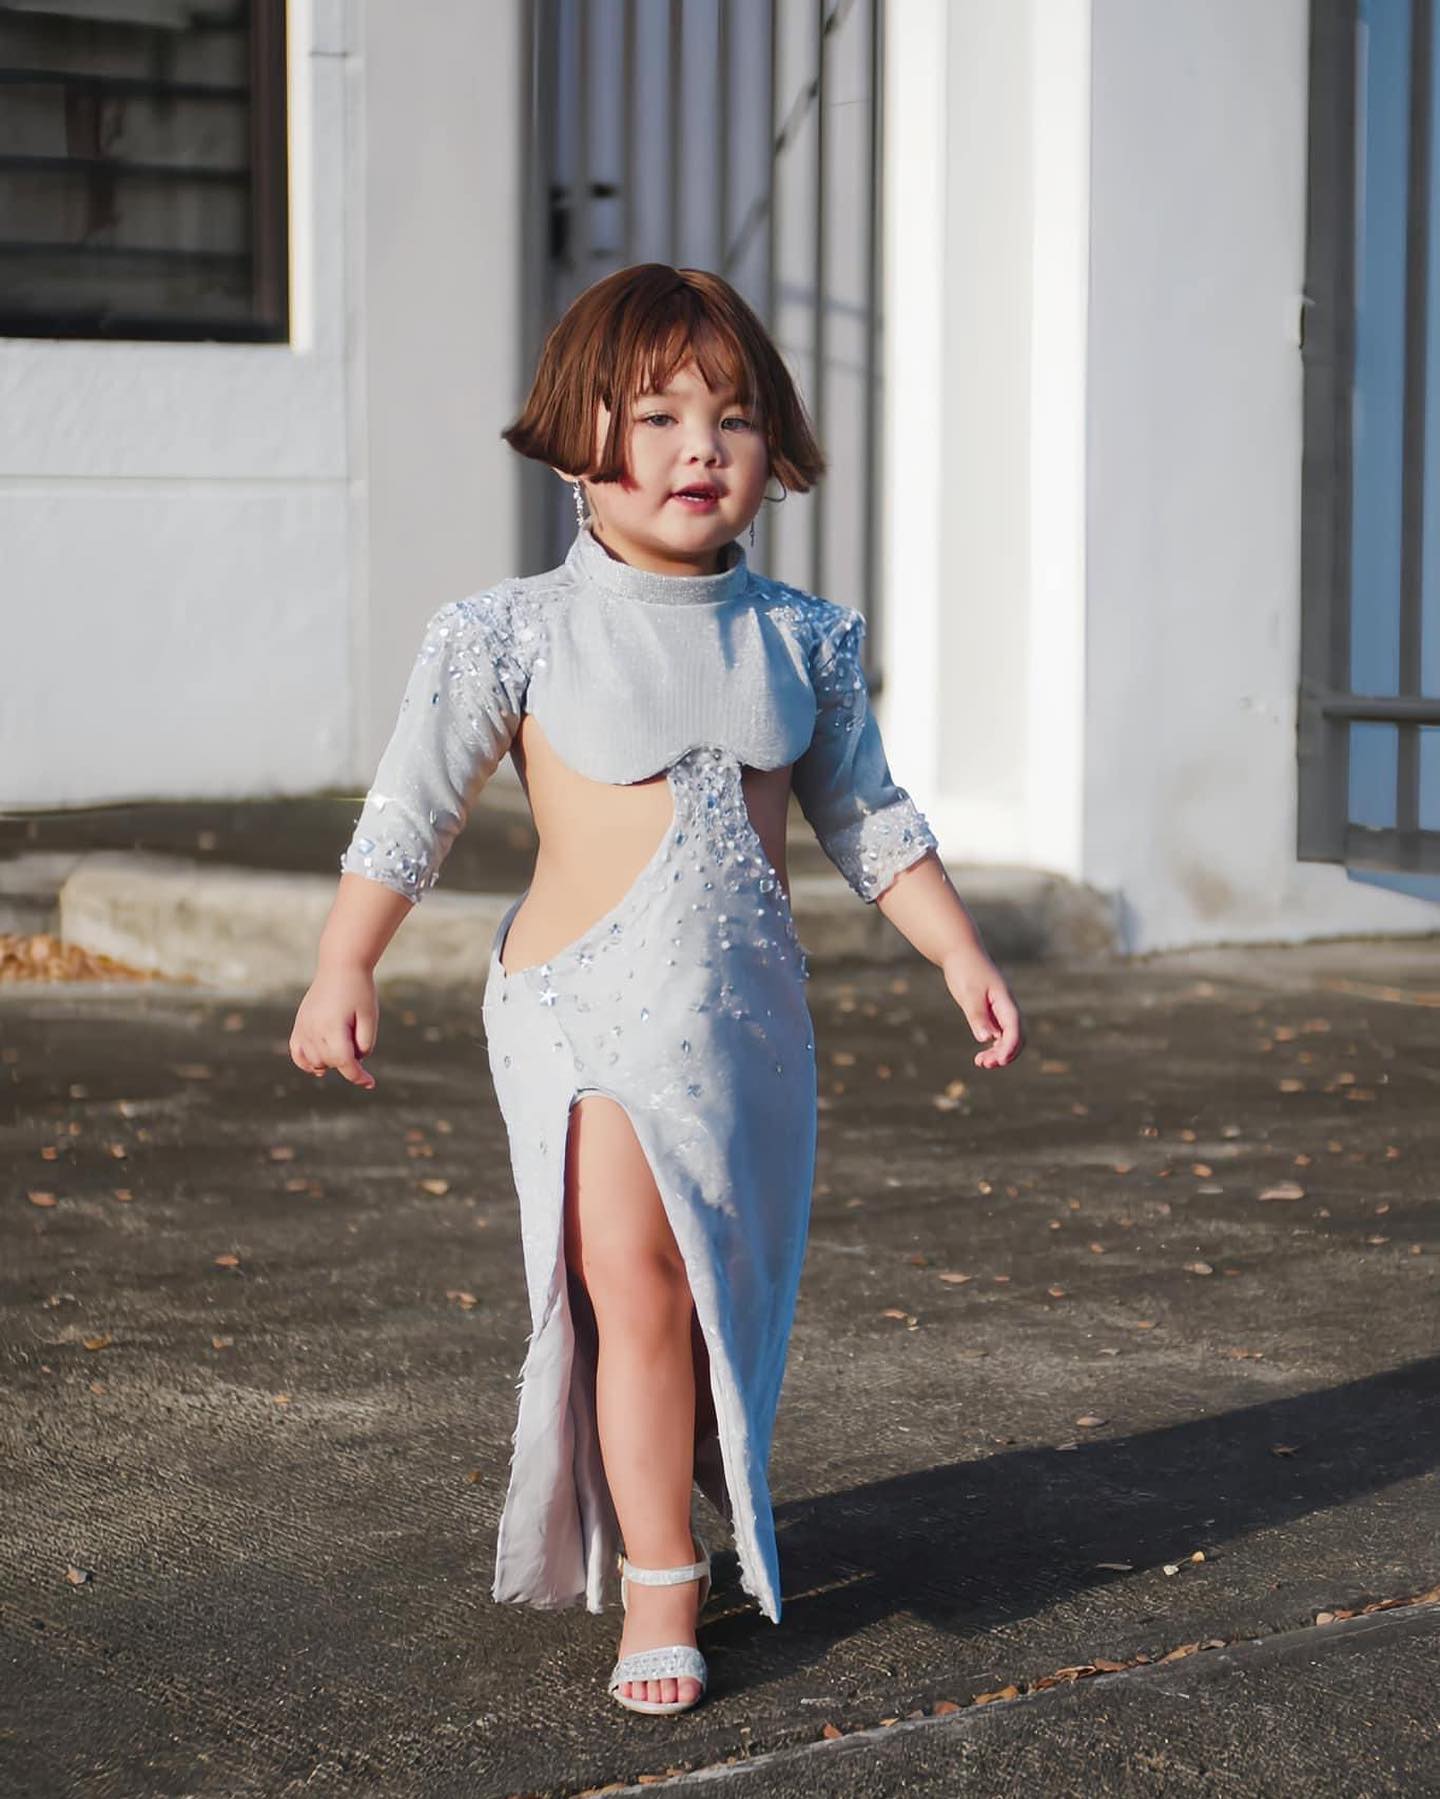 PHOTOS: Adorable kids recreate celebrity red carpet fashions on